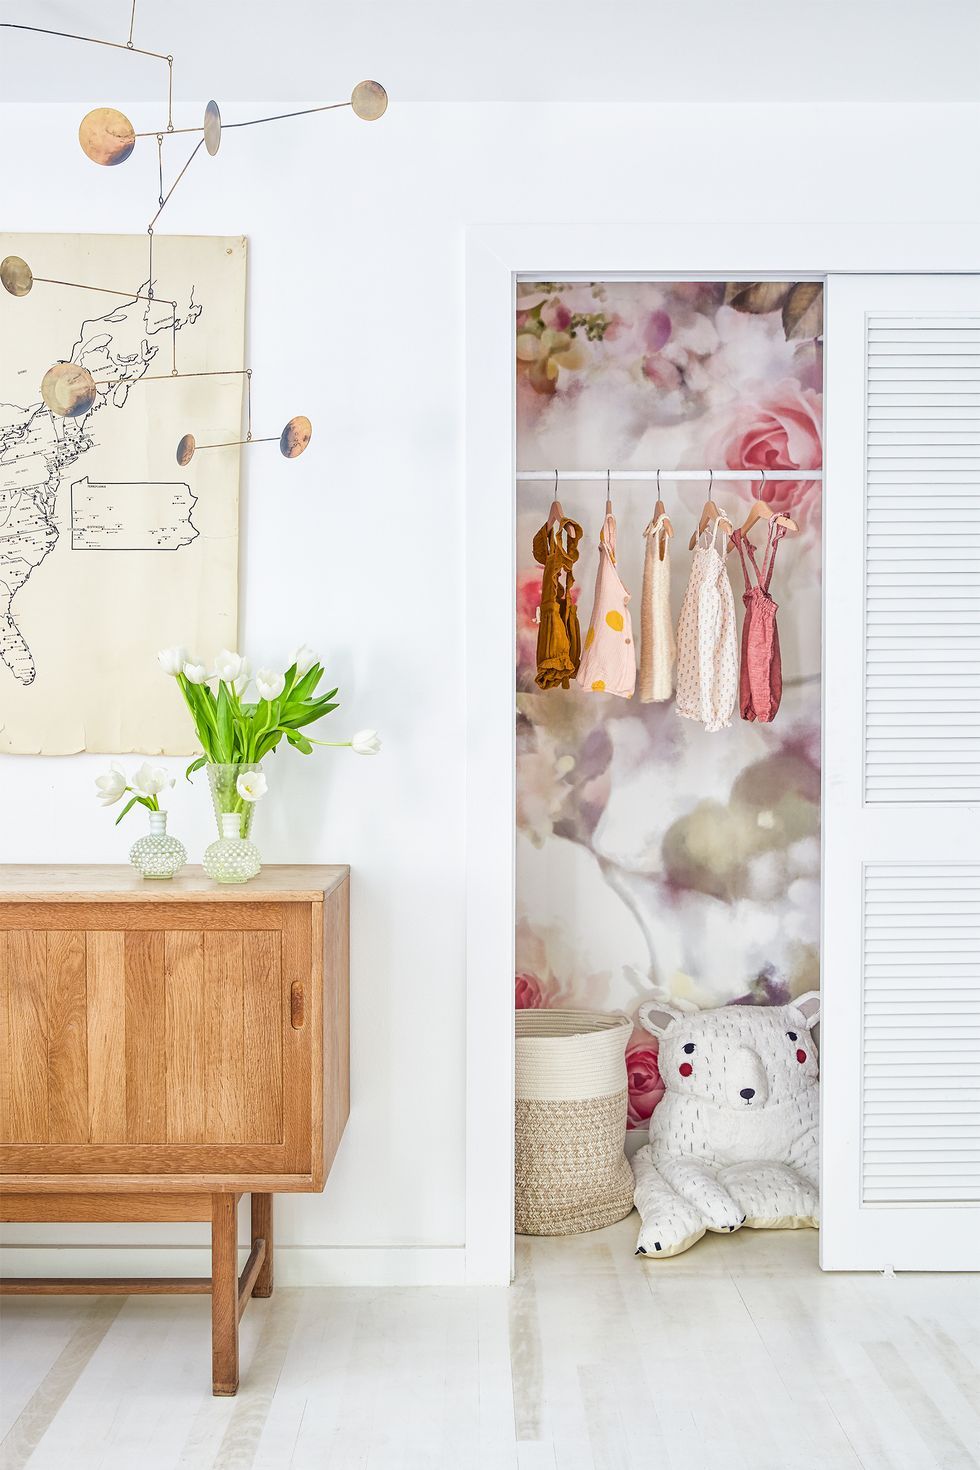 25 Best Small Closet Ideas to Borrow From Professional Designers